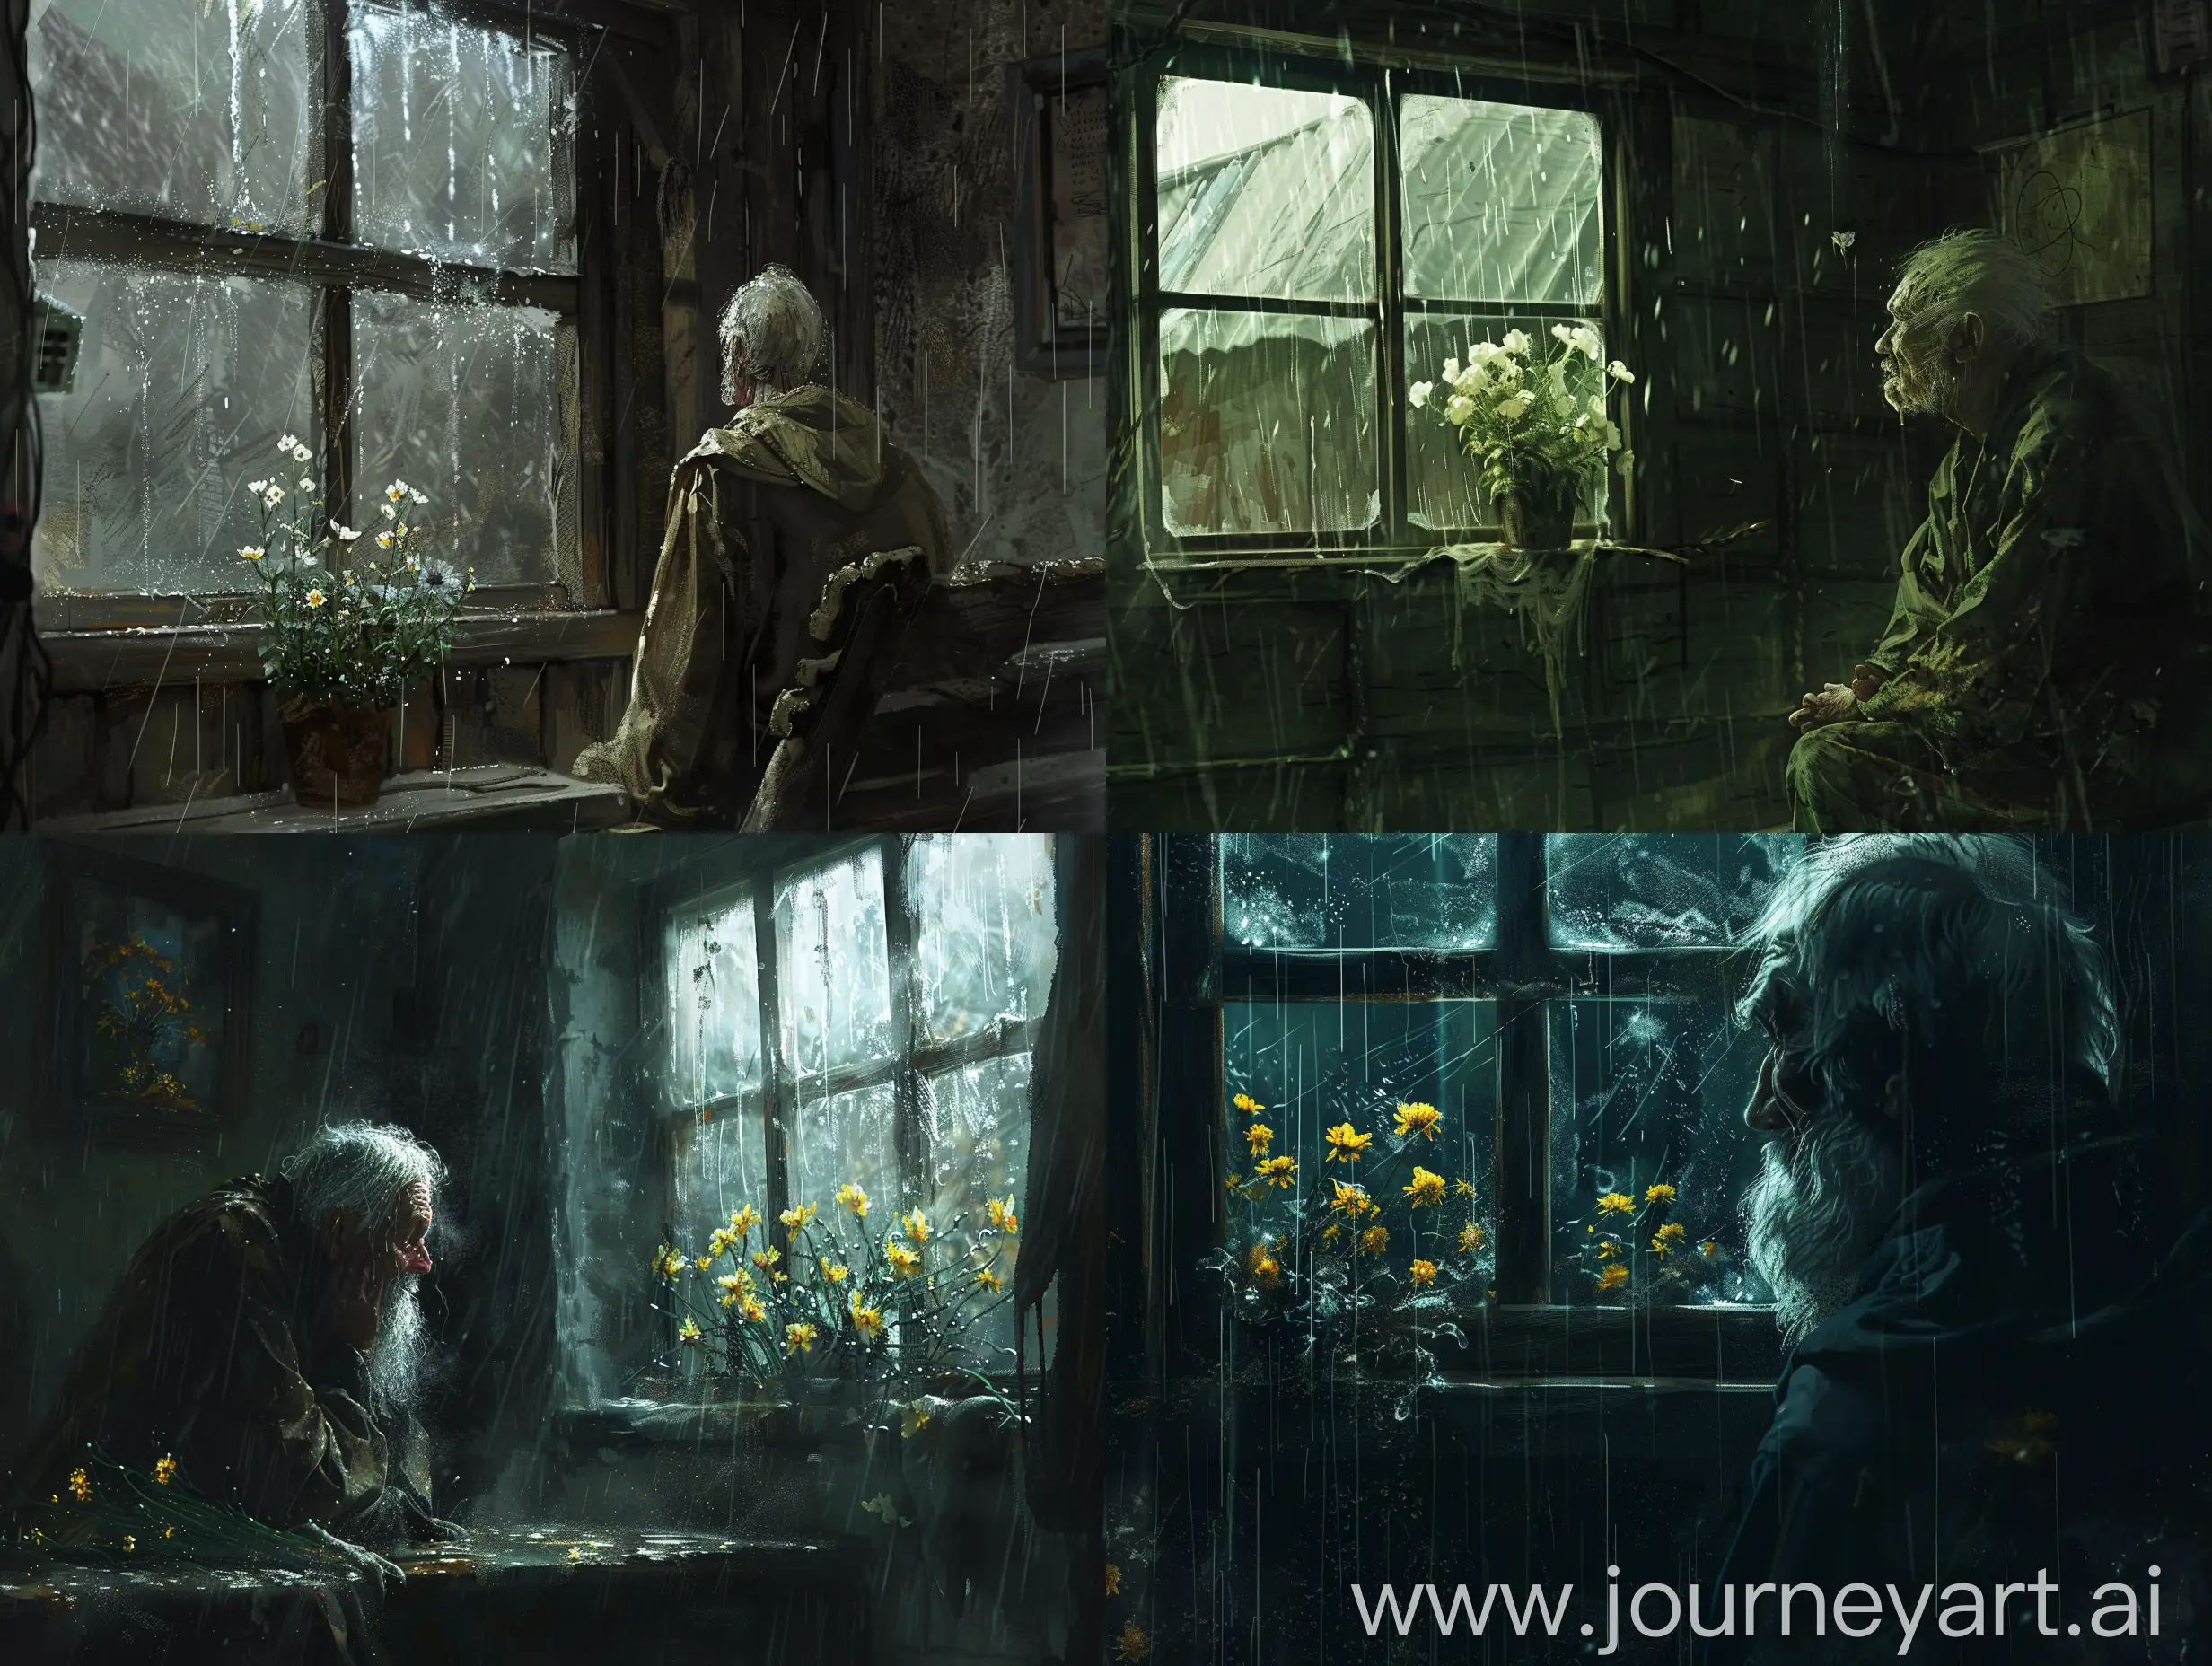 Solitary-Old-Man-Contemplating-Memories-Amid-Wilting-Flowers